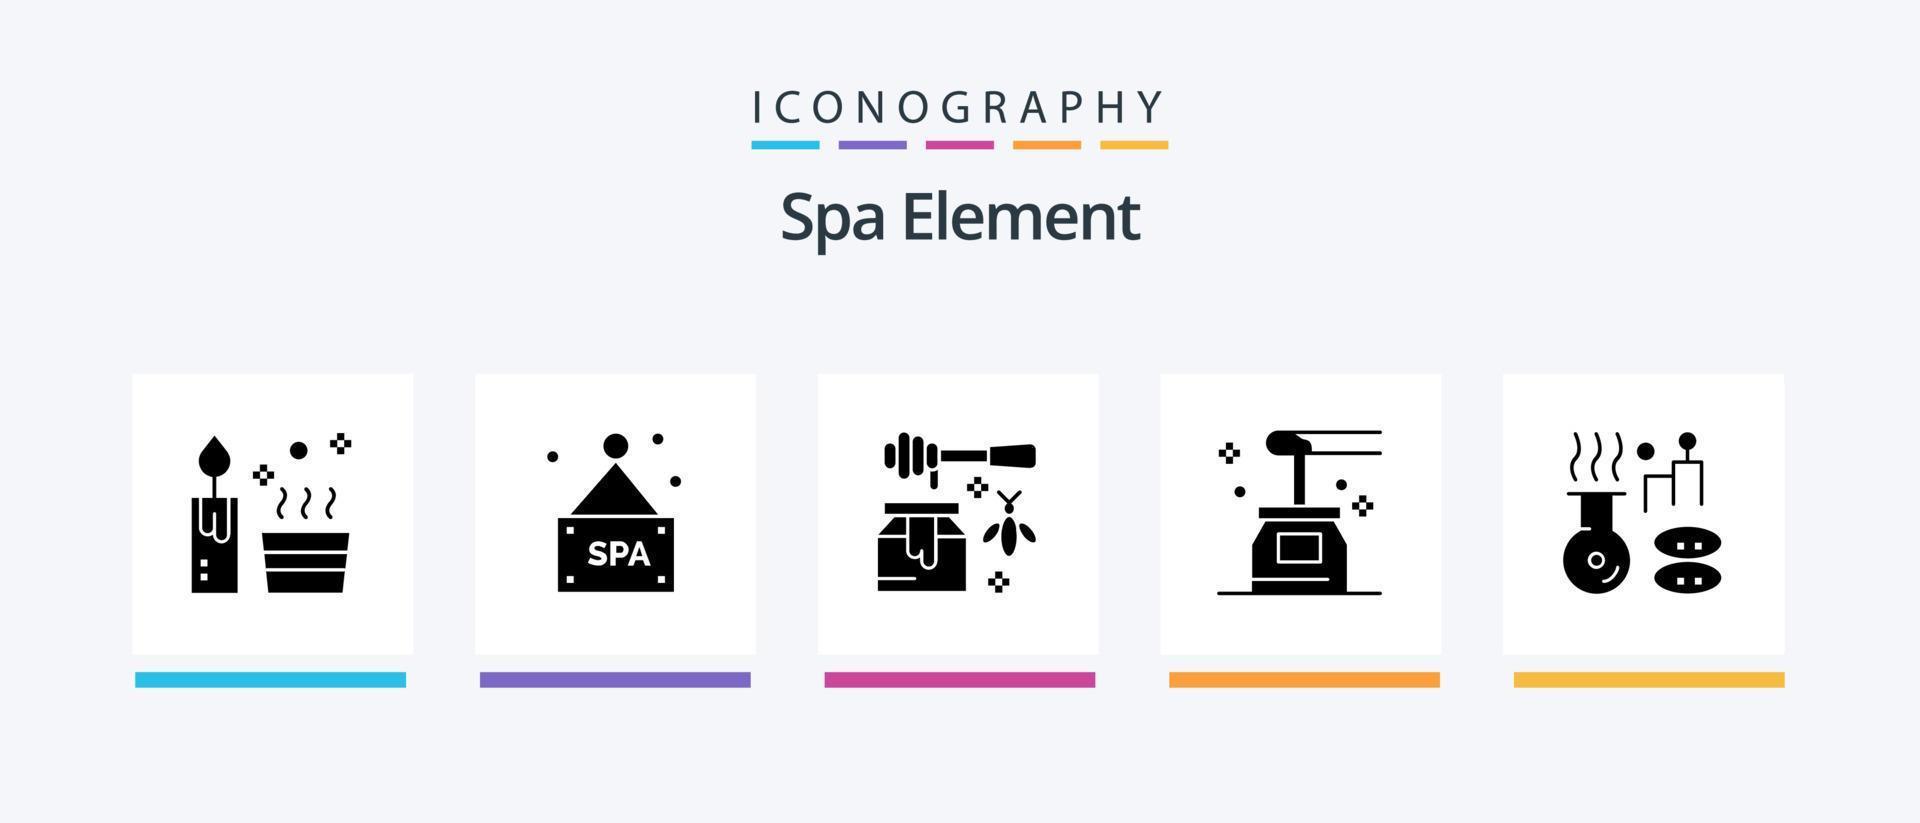 Spa Element Glyph 5 Icon Pack Including medical. yoga. honey. spa. honey. Creative Icons Design vector